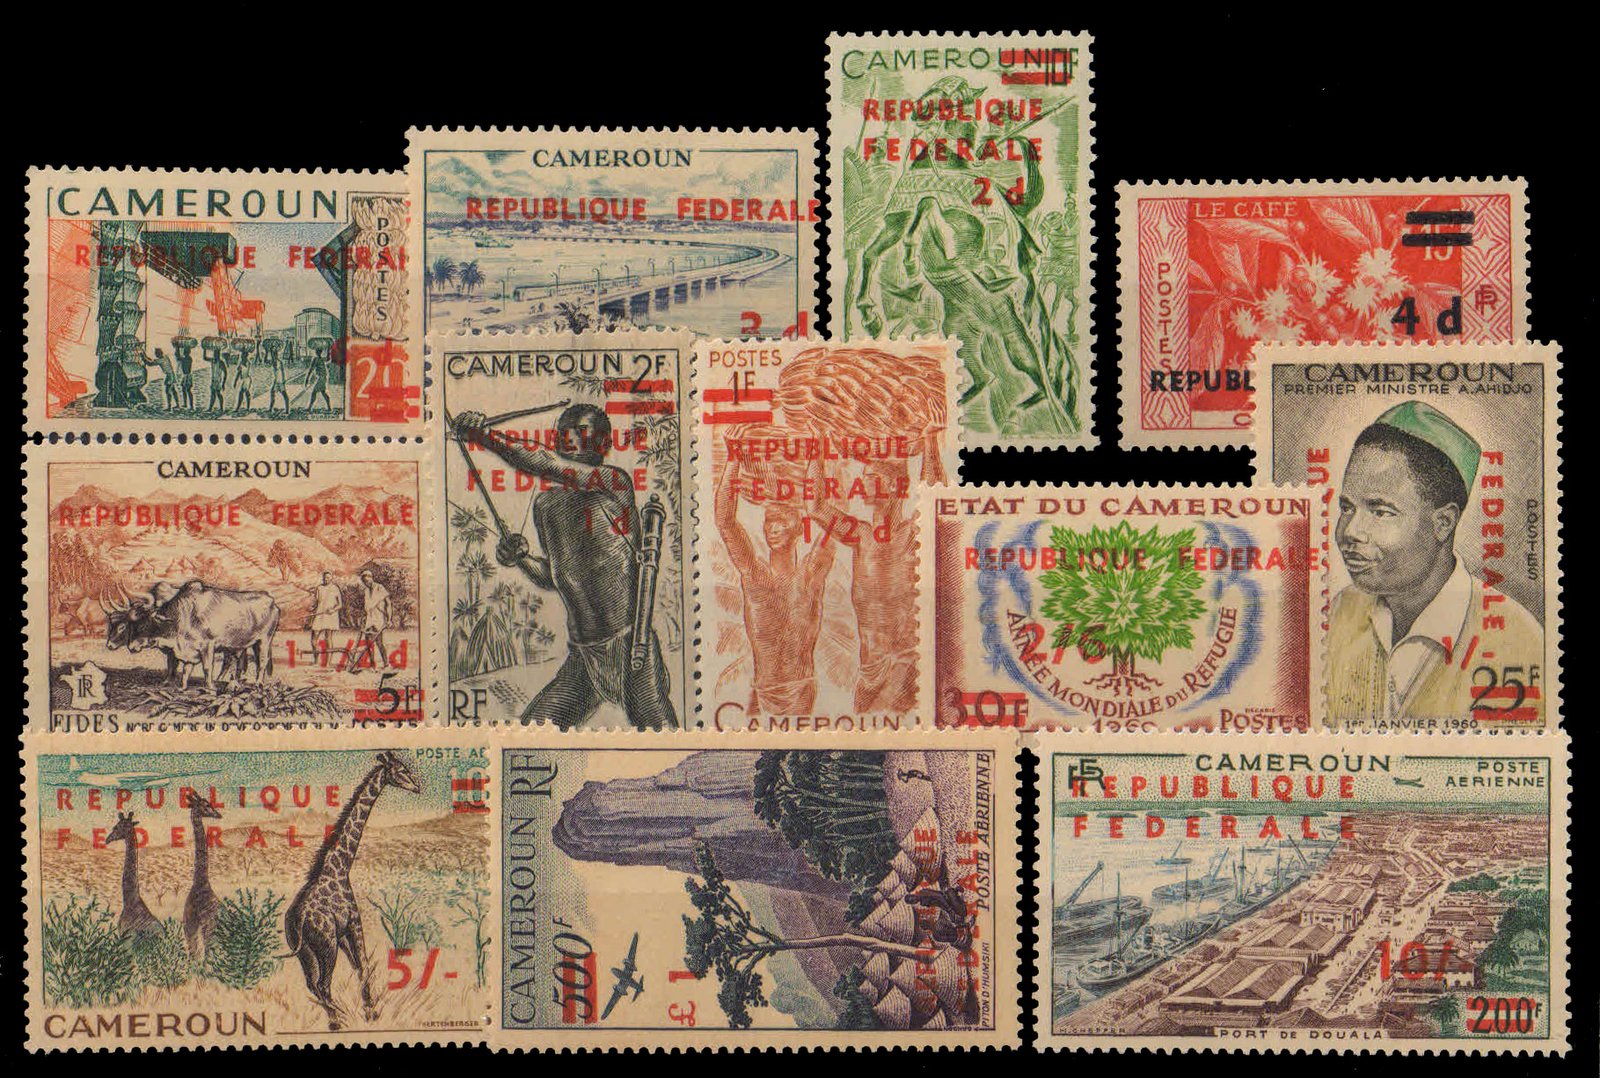 CAMEROUN 1961-Surcharged Thematic Issues-Complete Set of 12 Stamps-MNH, Cat £ 80-S.G. 286-297a